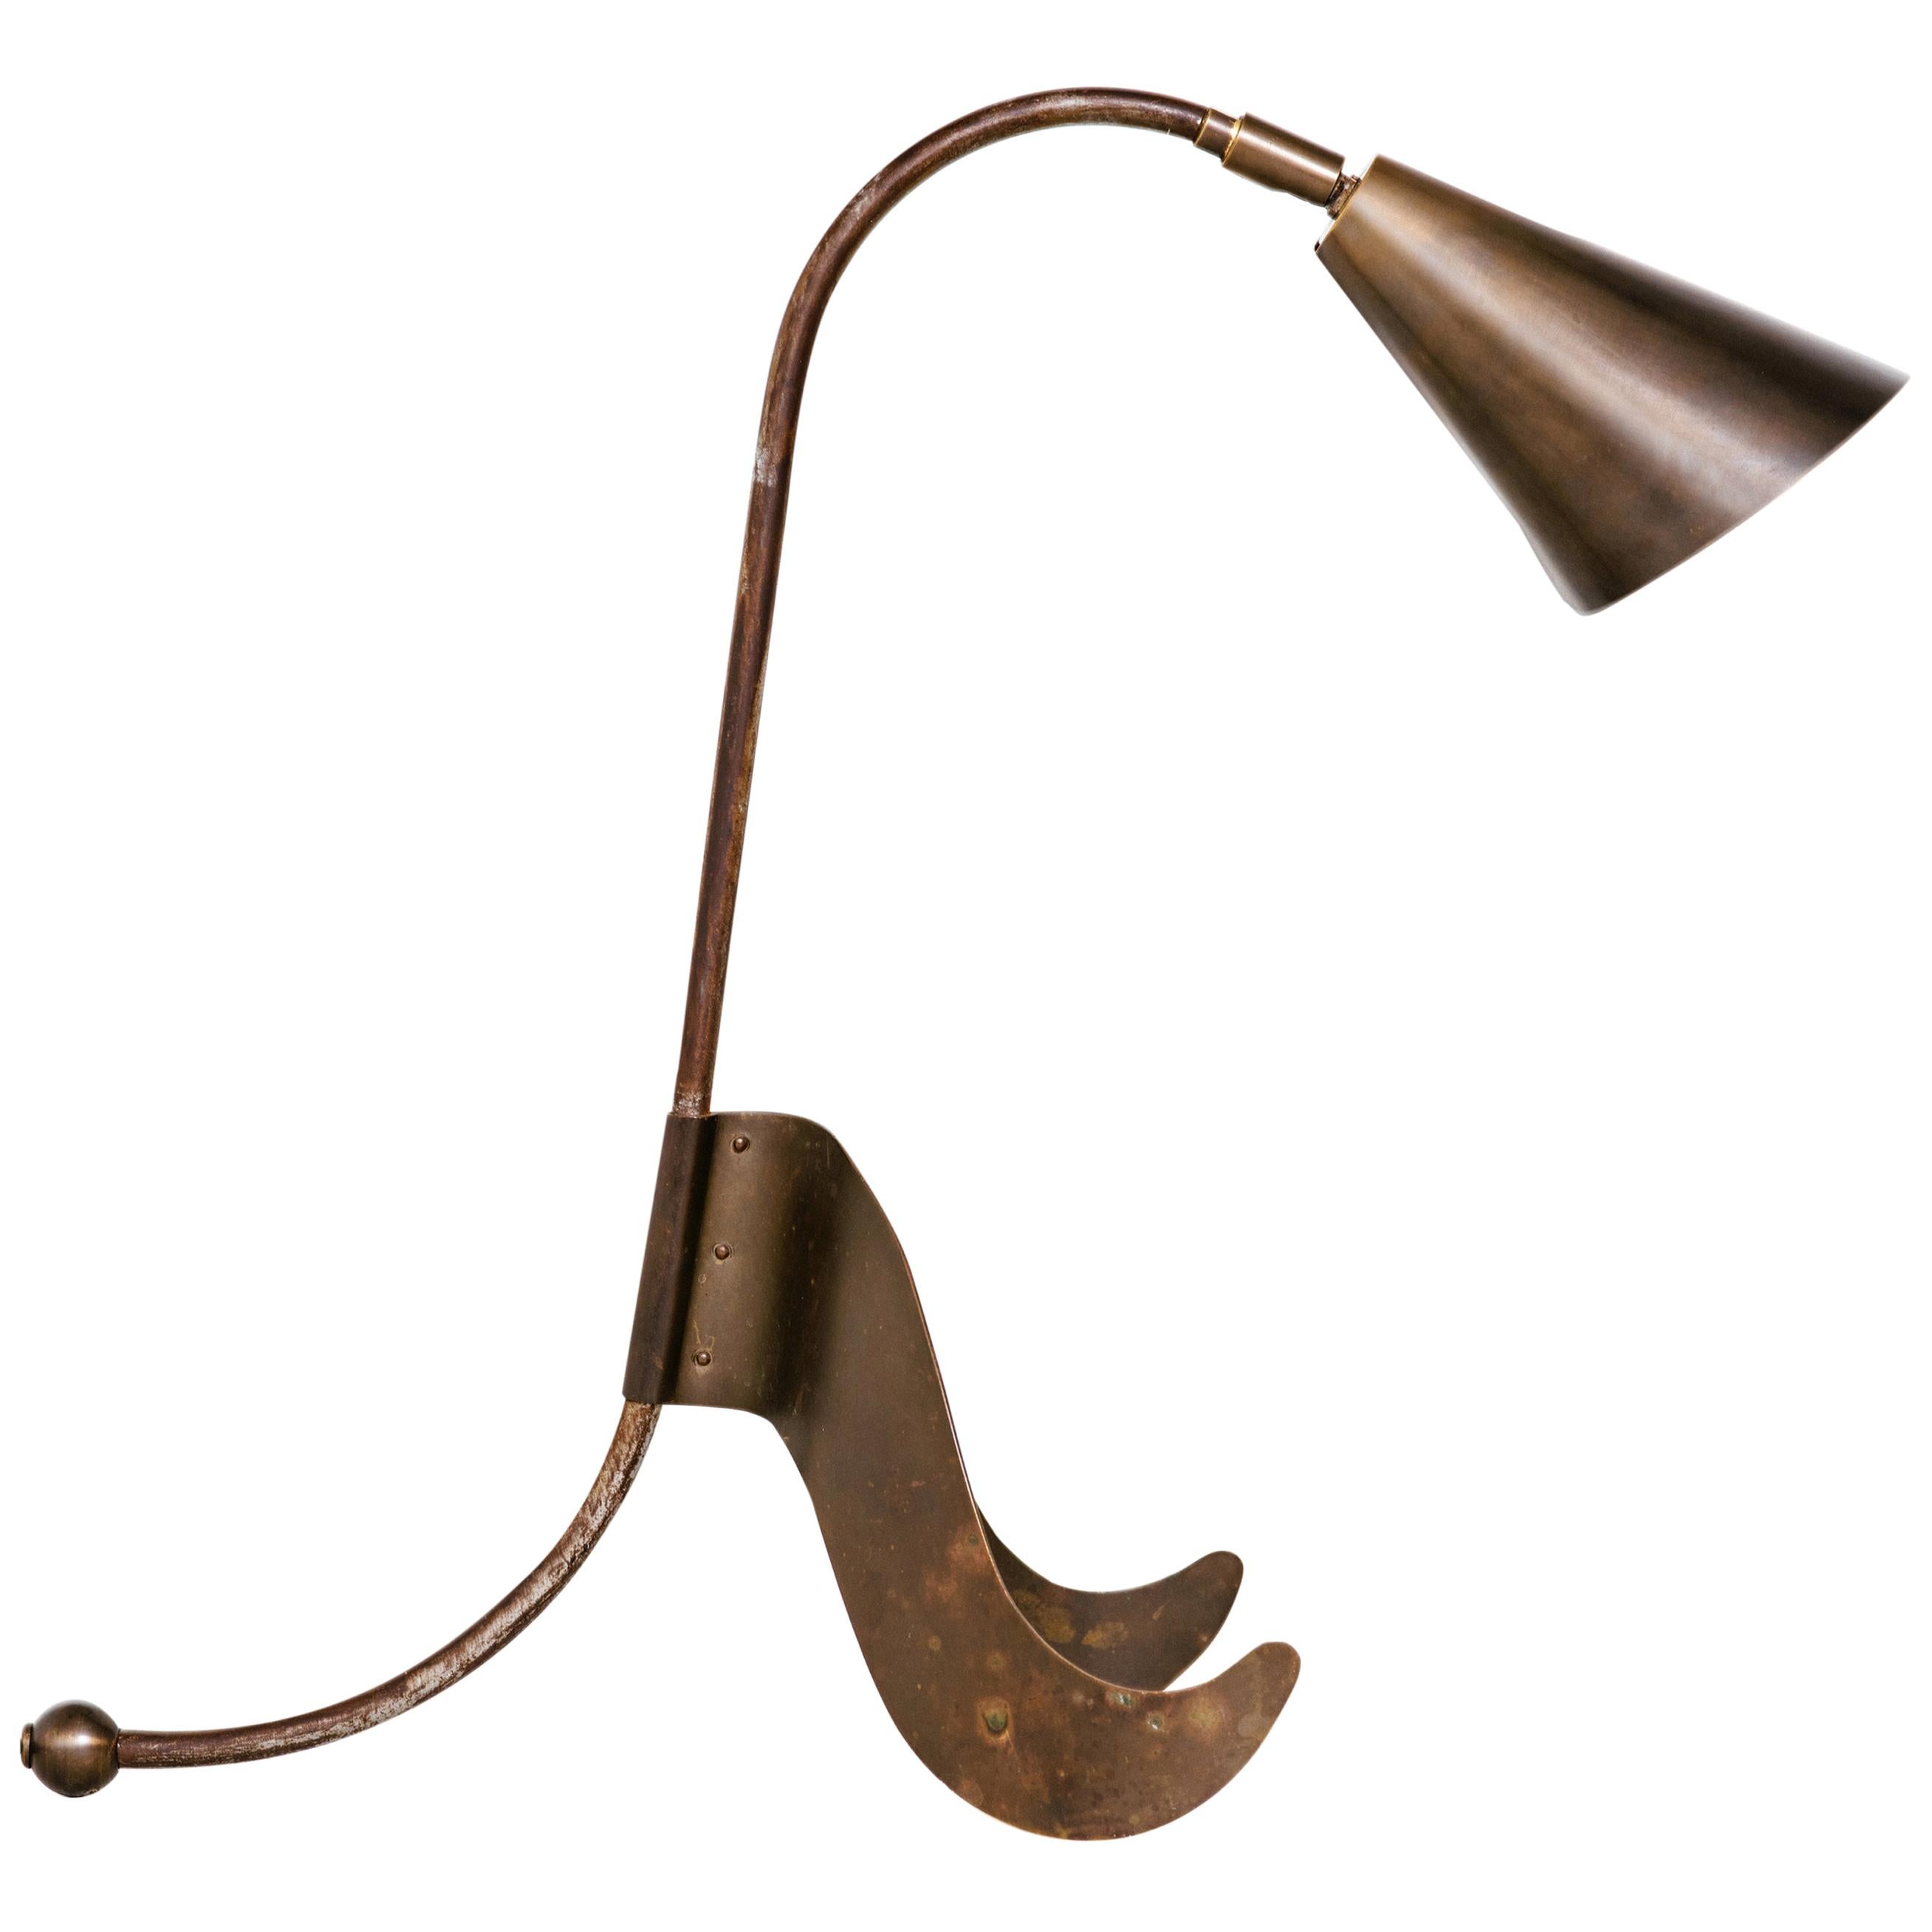 Rare Desk Lamp in Patinated Brass and Steel, Netherlands, circa 1975